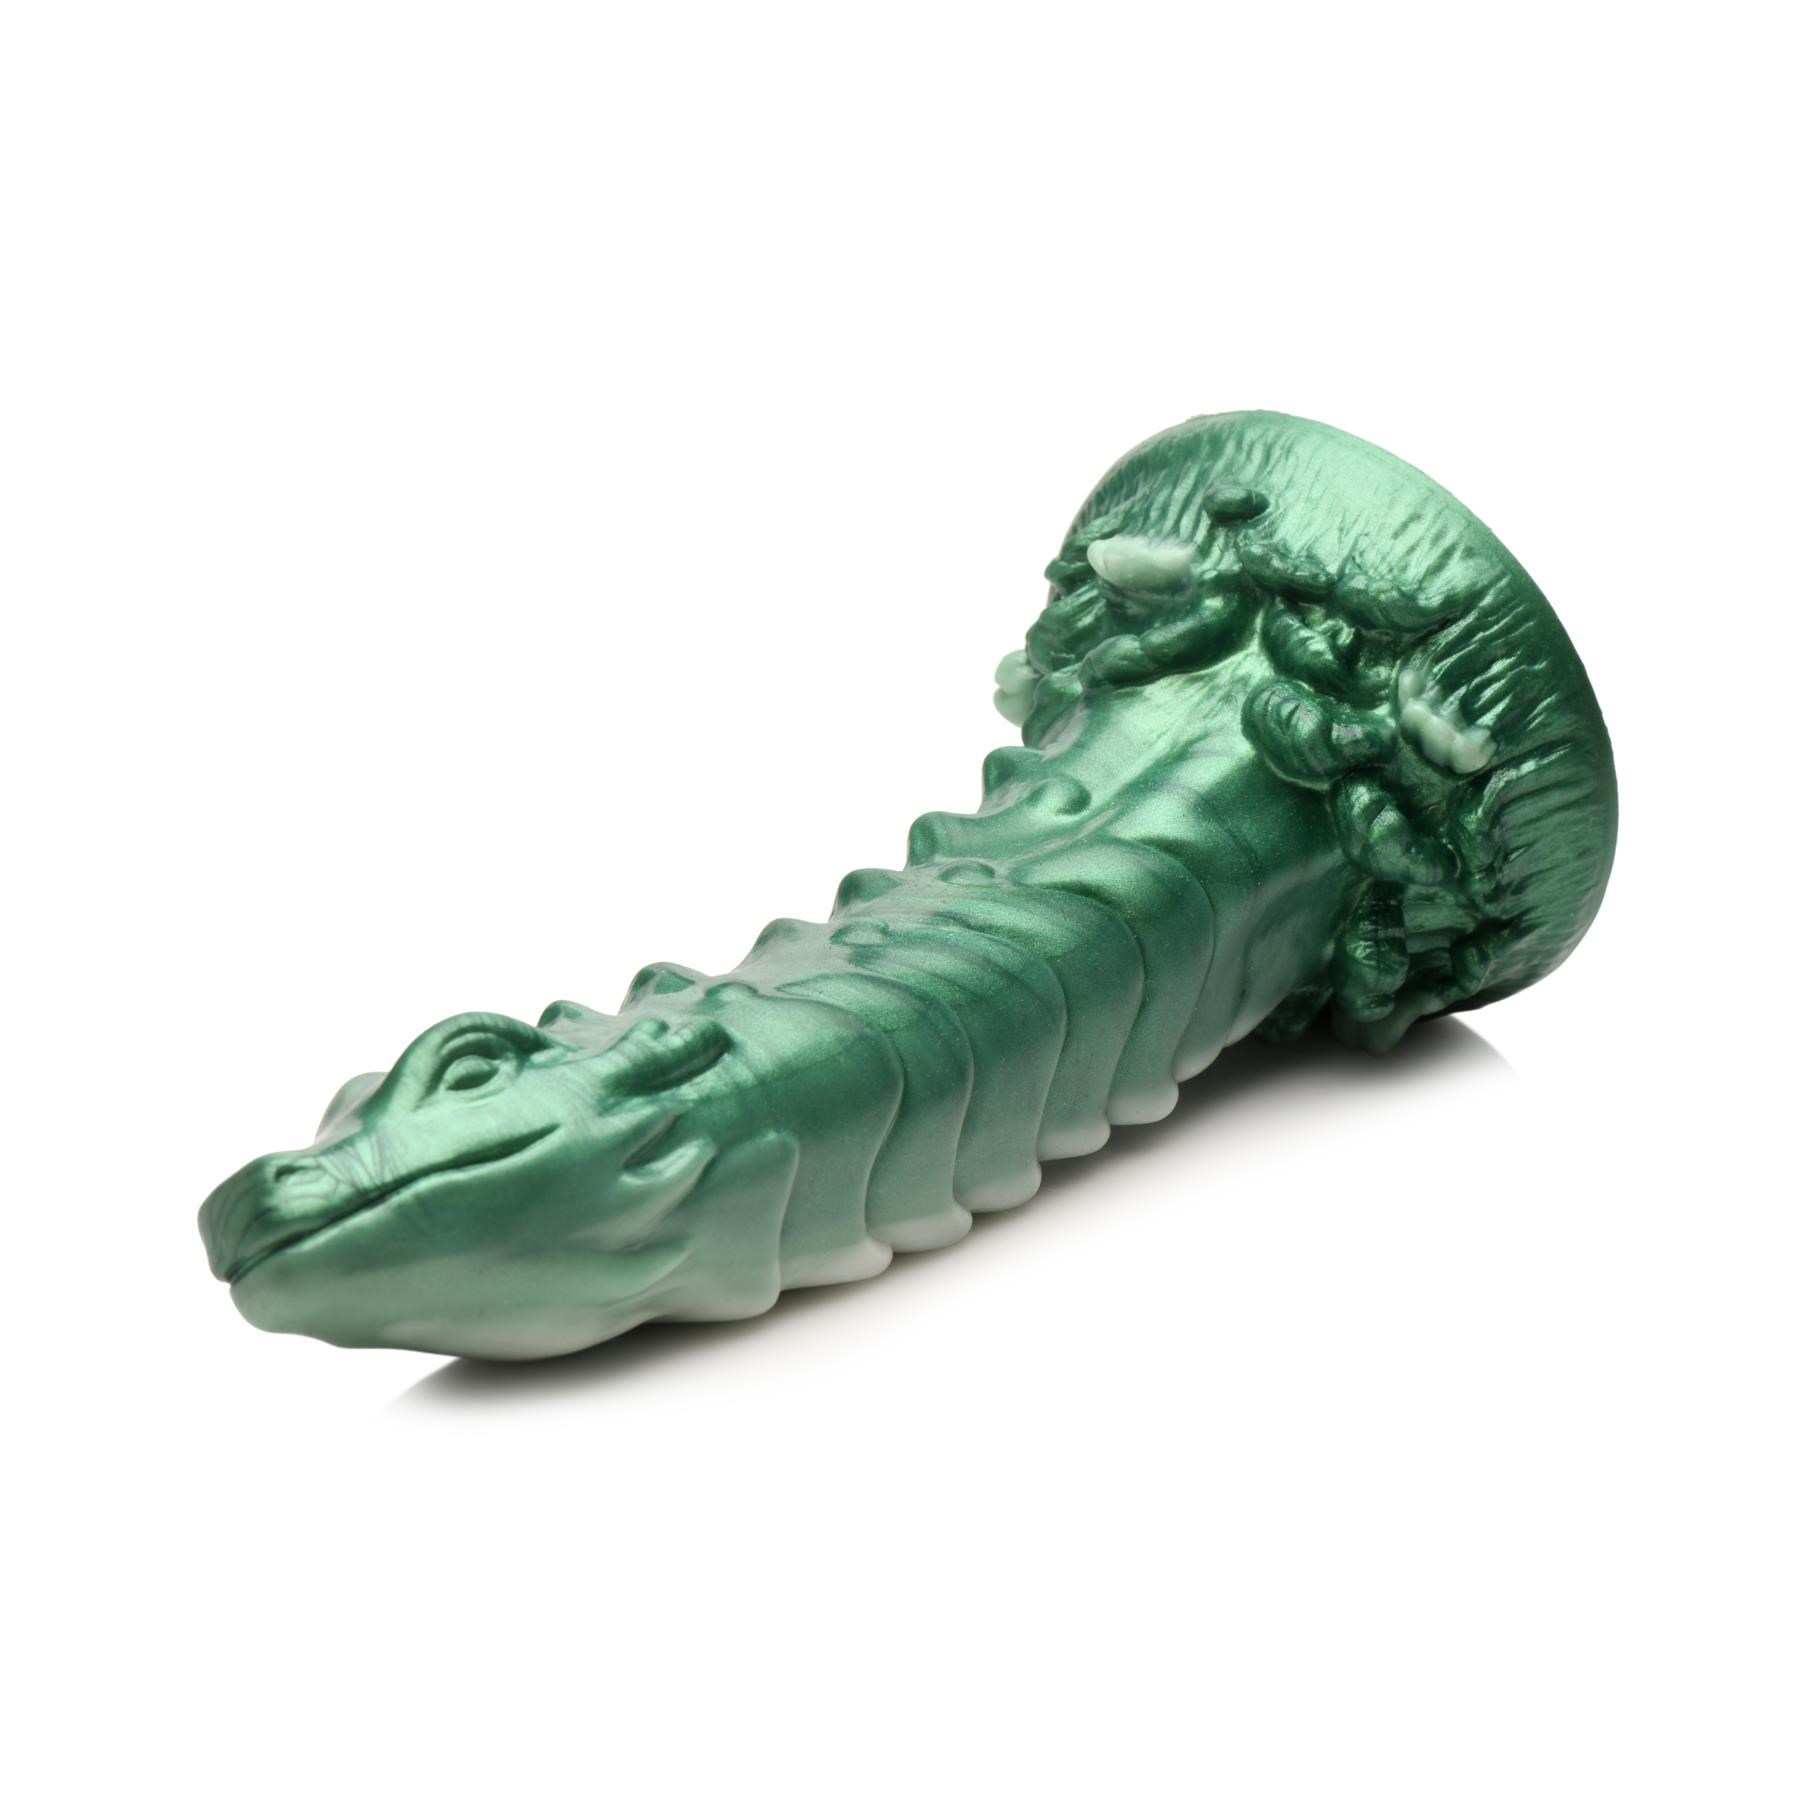 CreatureCocks Cockness Monster Silicone Dildo - Product Shot #7